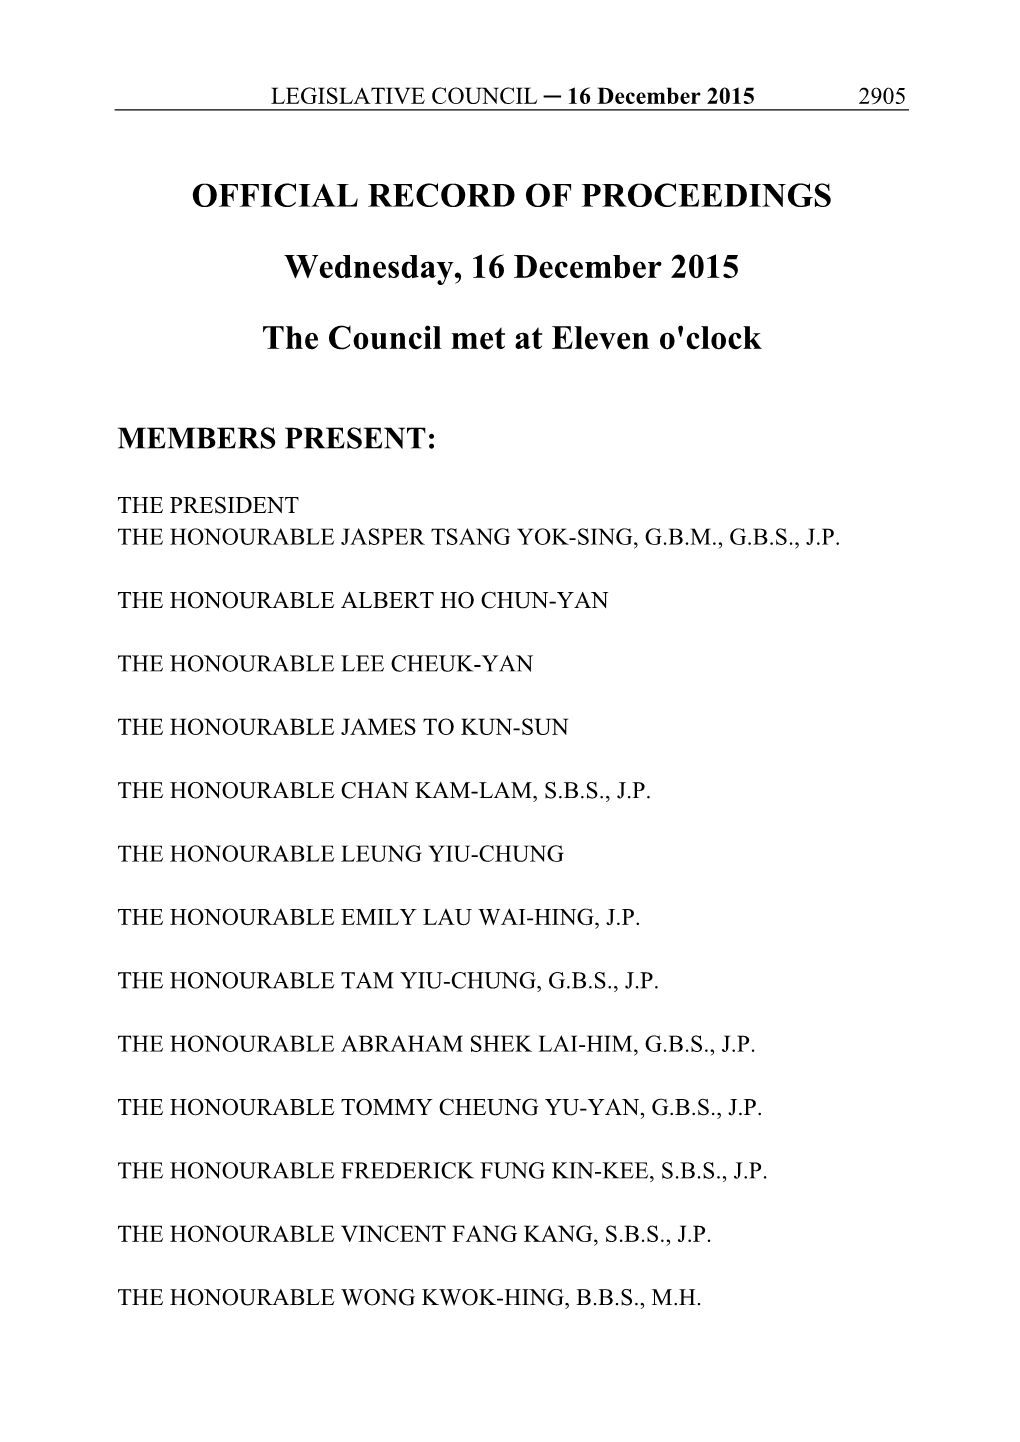 OFFICIAL RECORD of PROCEEDINGS Wednesday, 16